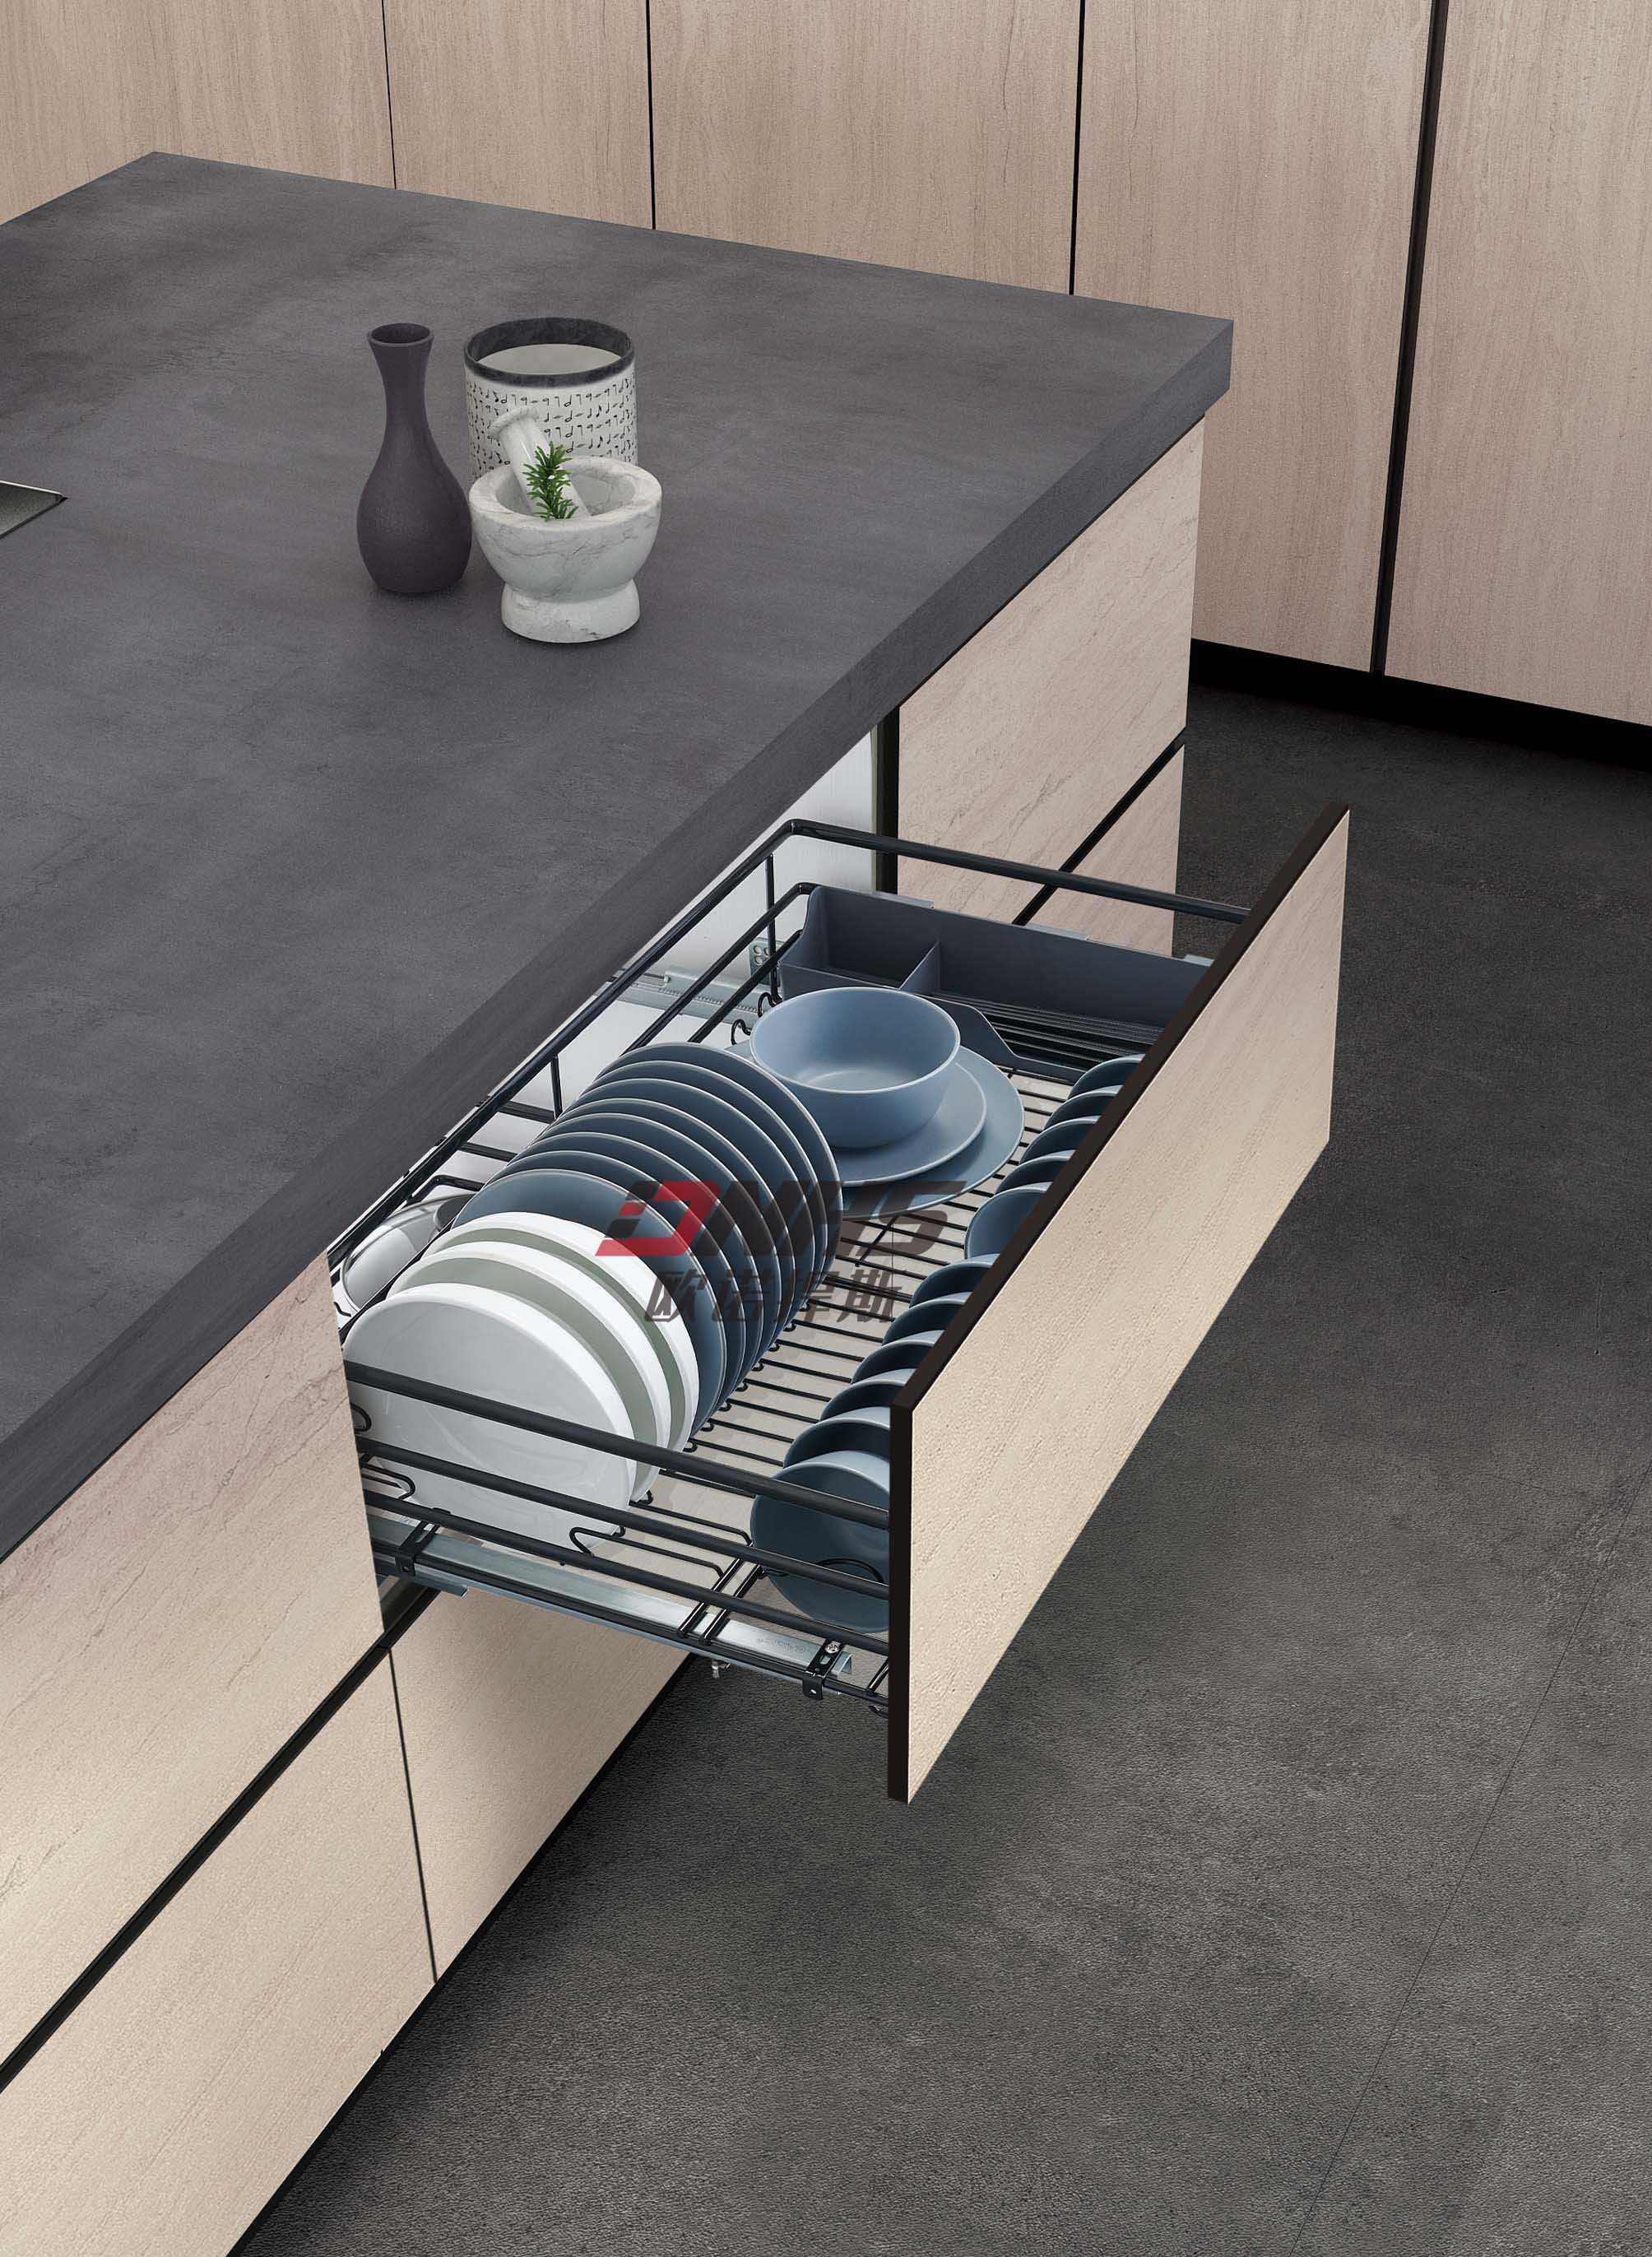 Maximize Space and Accessibility with our Blind Corner Pull-Out Basket Solution